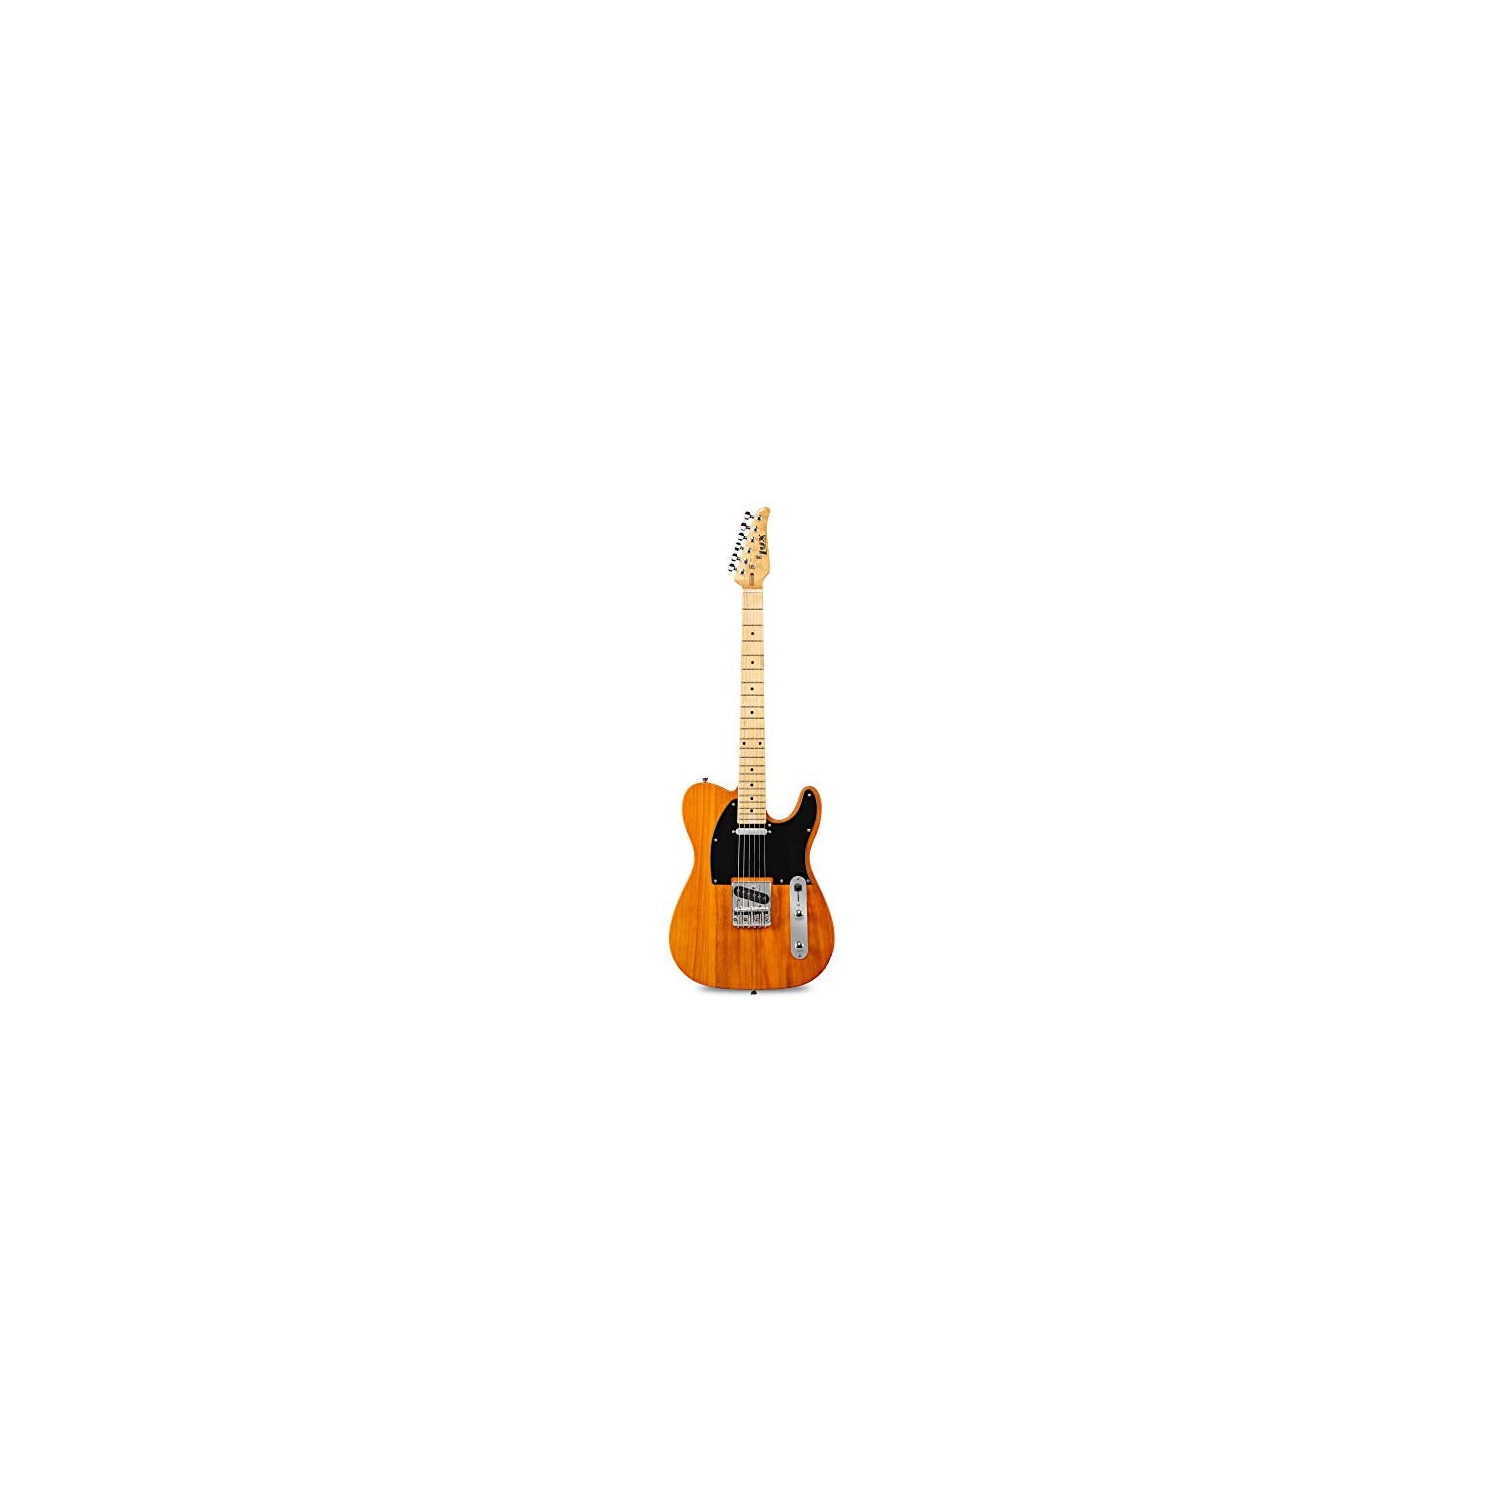 LyxPro 39” Electric Telecaster Guitar | Solid Full-Size Paulownia Wood Body, 3-Ply Pickguard, C-Shape Neck, Ashtray Bridge, Quality Gear Tuners, 3-Way Switch & Volume/Tone Controls | 2 Picks Included